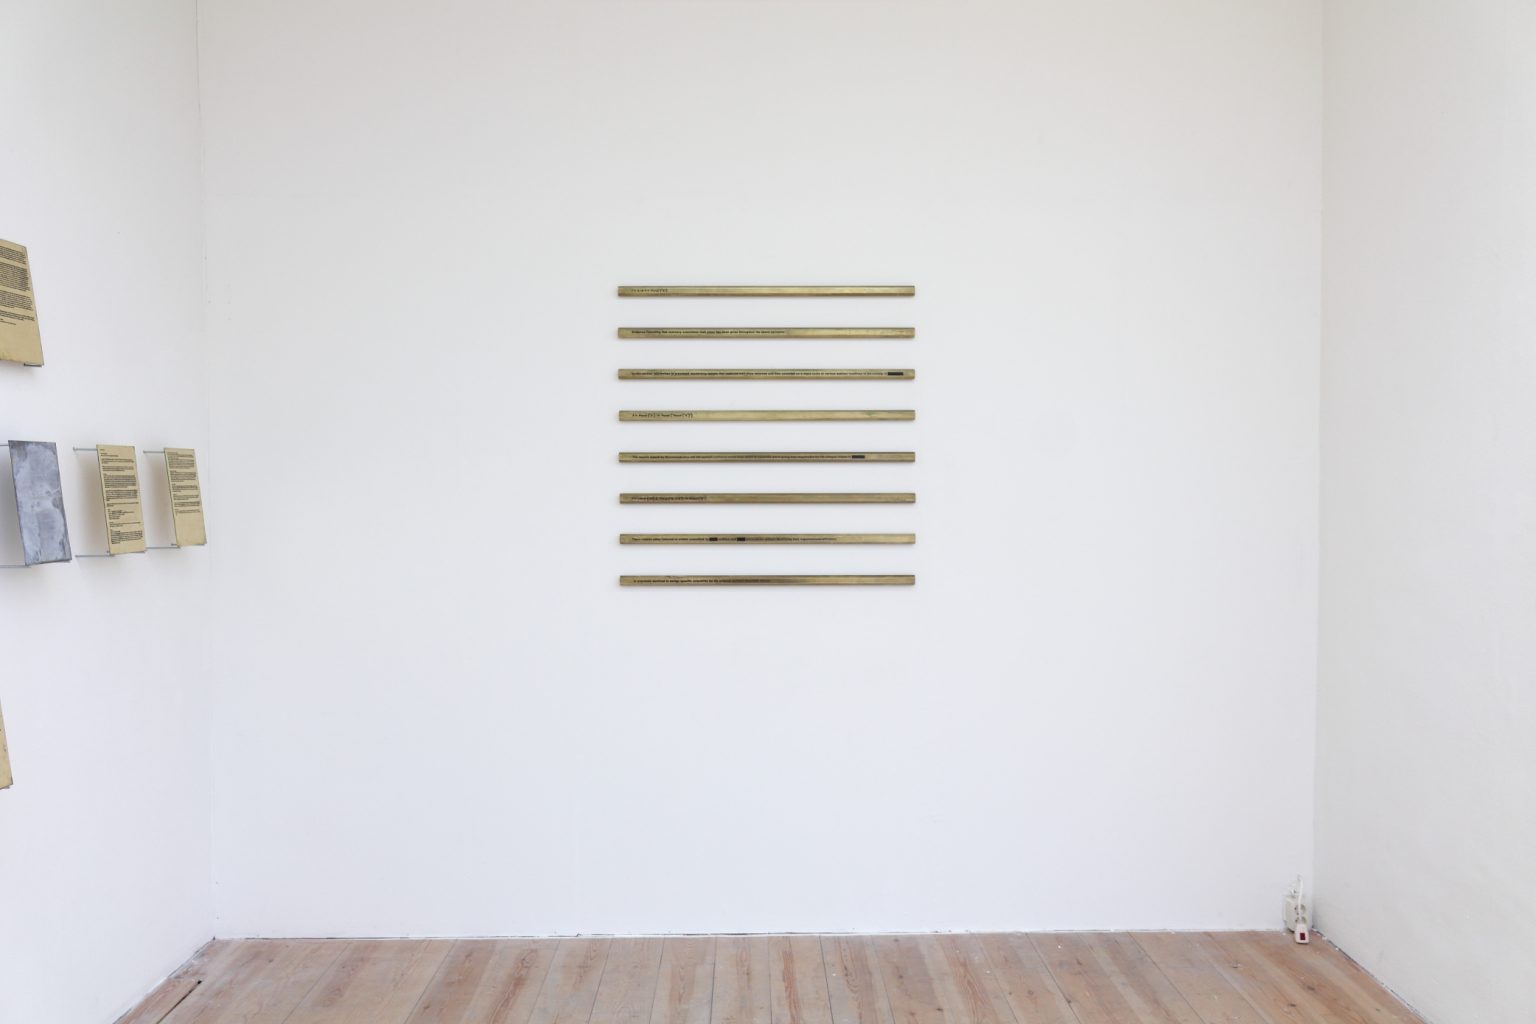 Installation - brass, lead, engraving, dimensions variable, 2015.